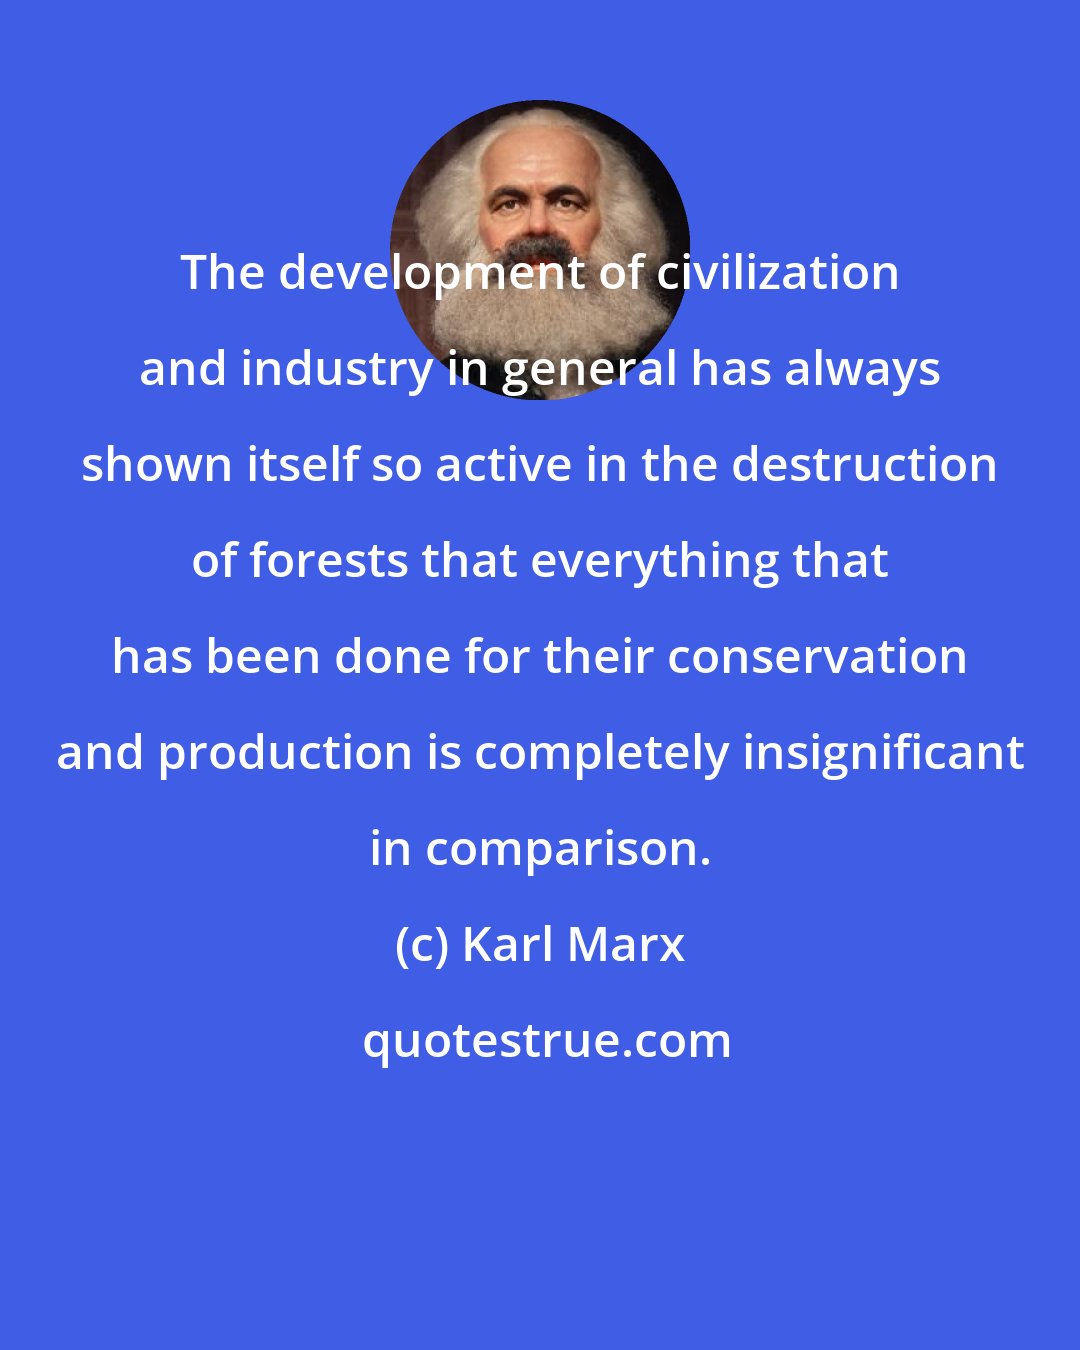 Karl Marx: The development of civilization and industry in general has always shown itself so active in the destruction of forests that everything that has been done for their conservation and production is completely insignificant in comparison.